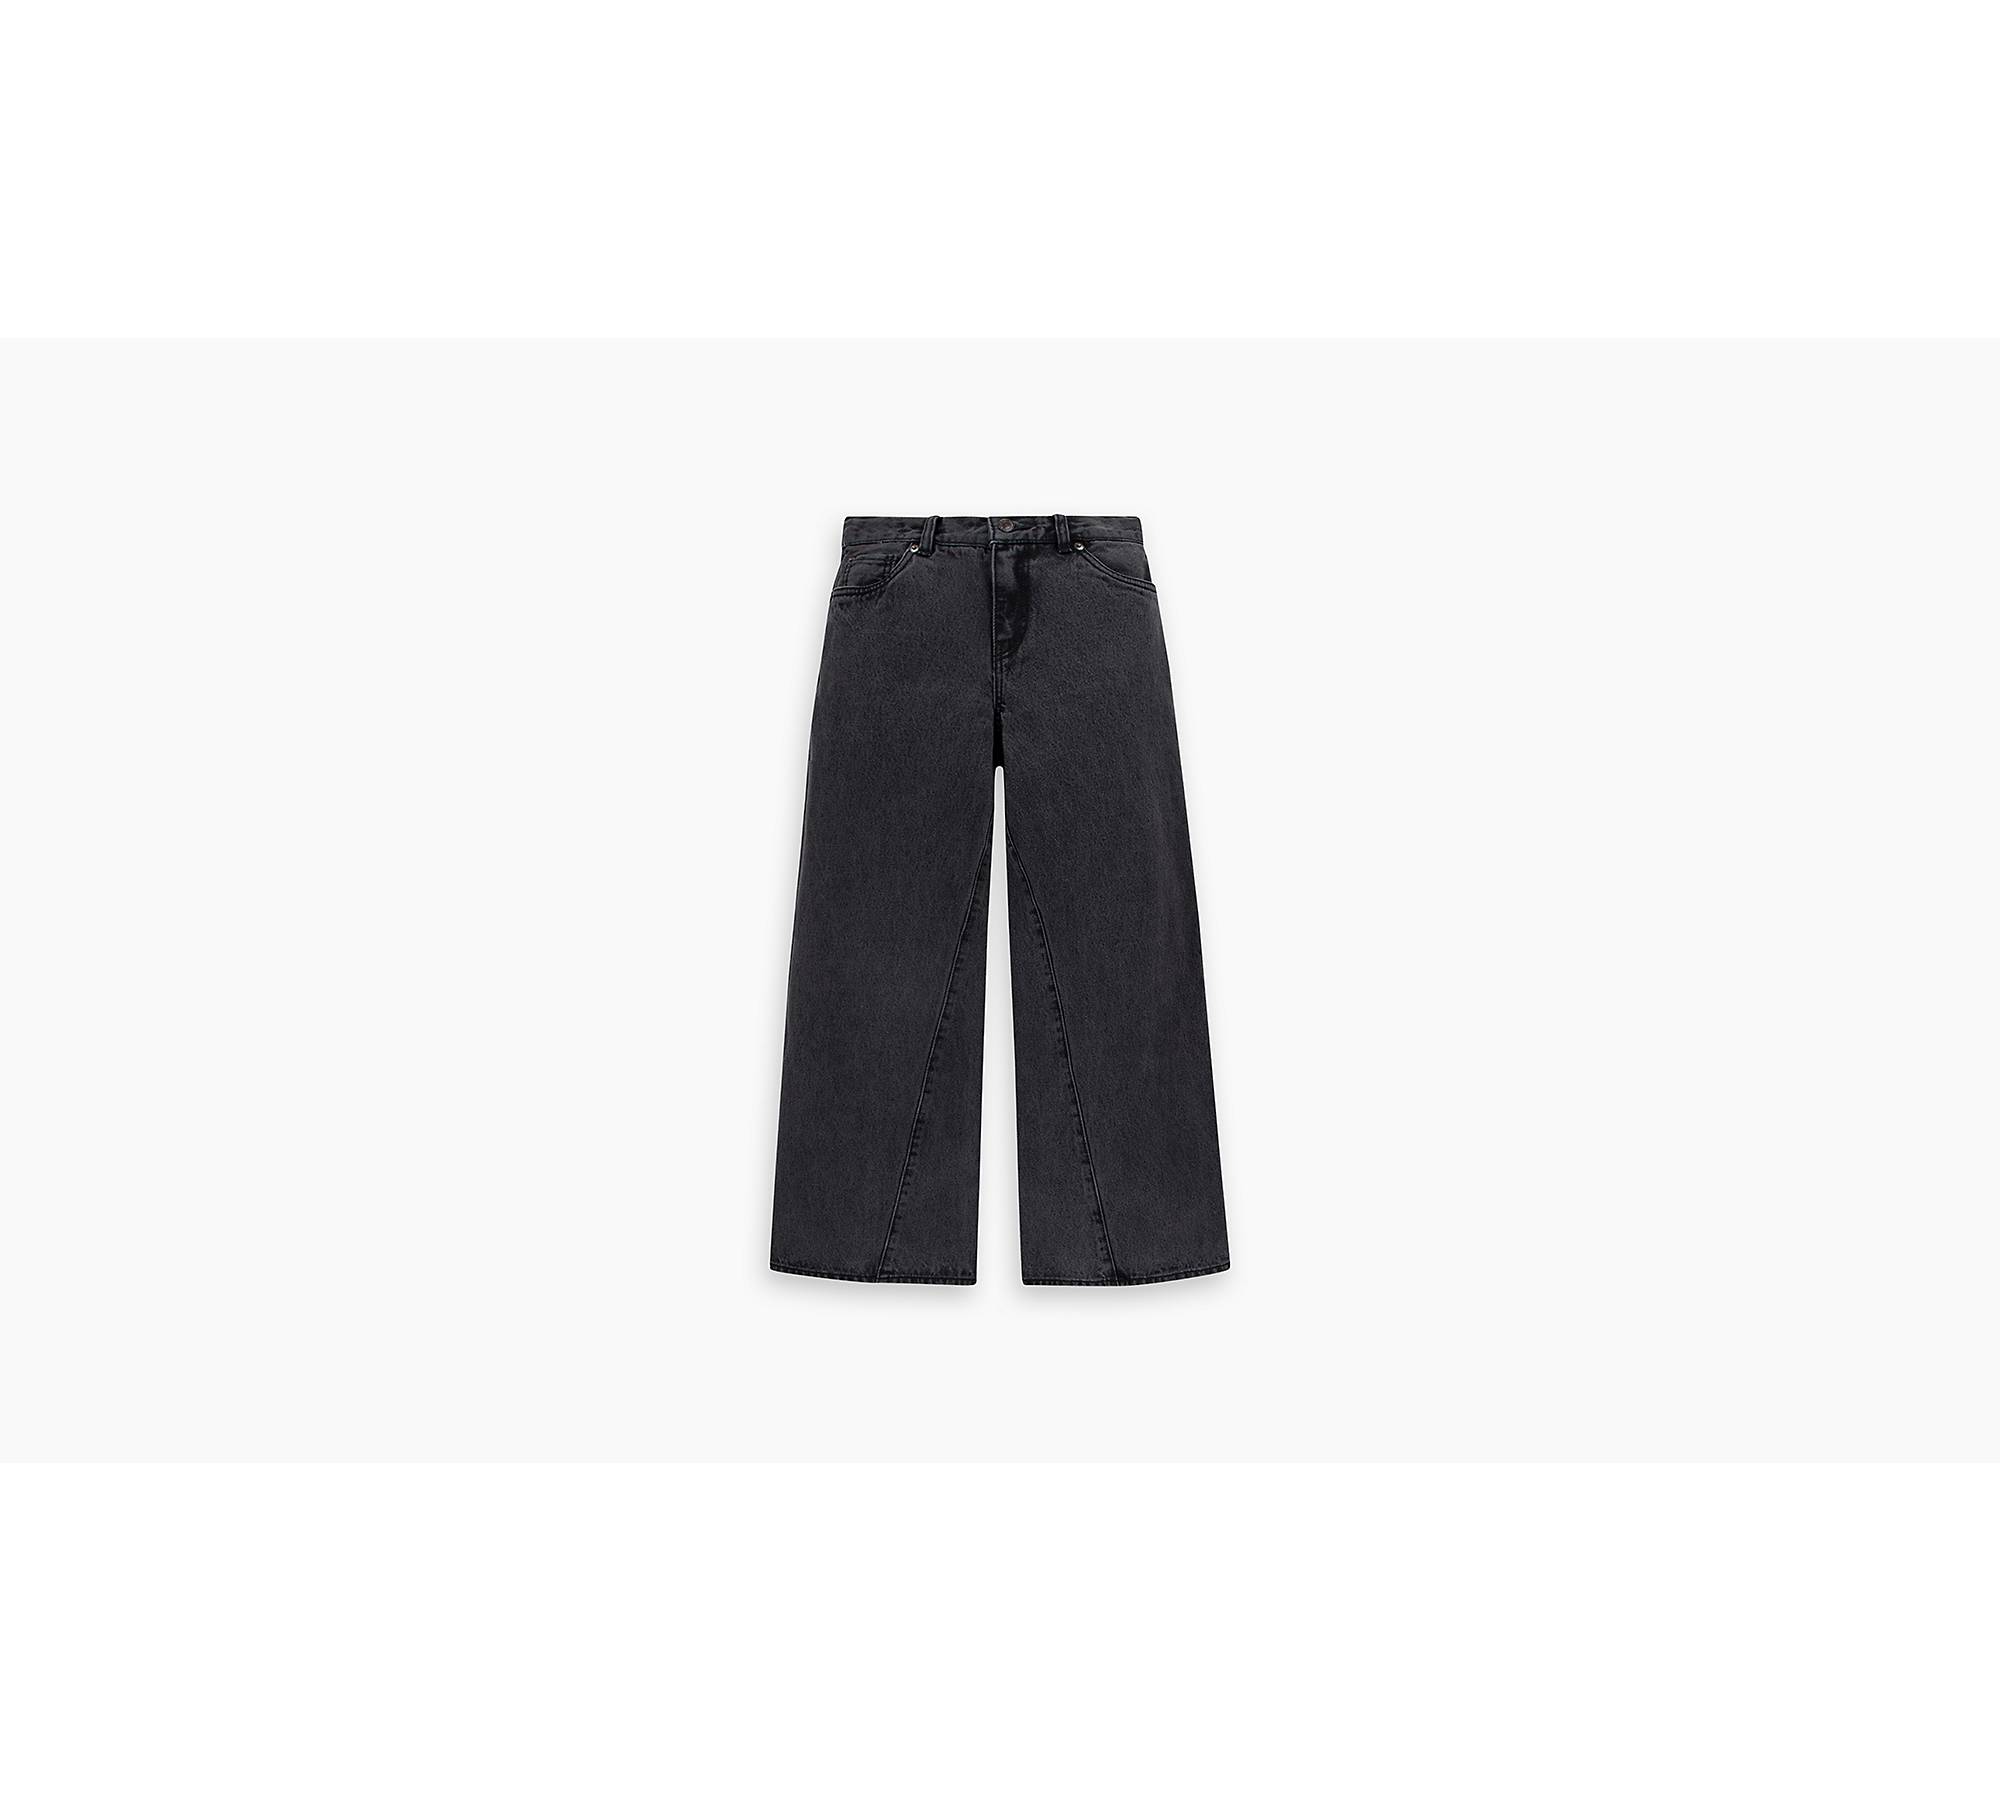 Teenager Altered '94 Baggy Wide Leg Jeans - Black | Levi's® GB